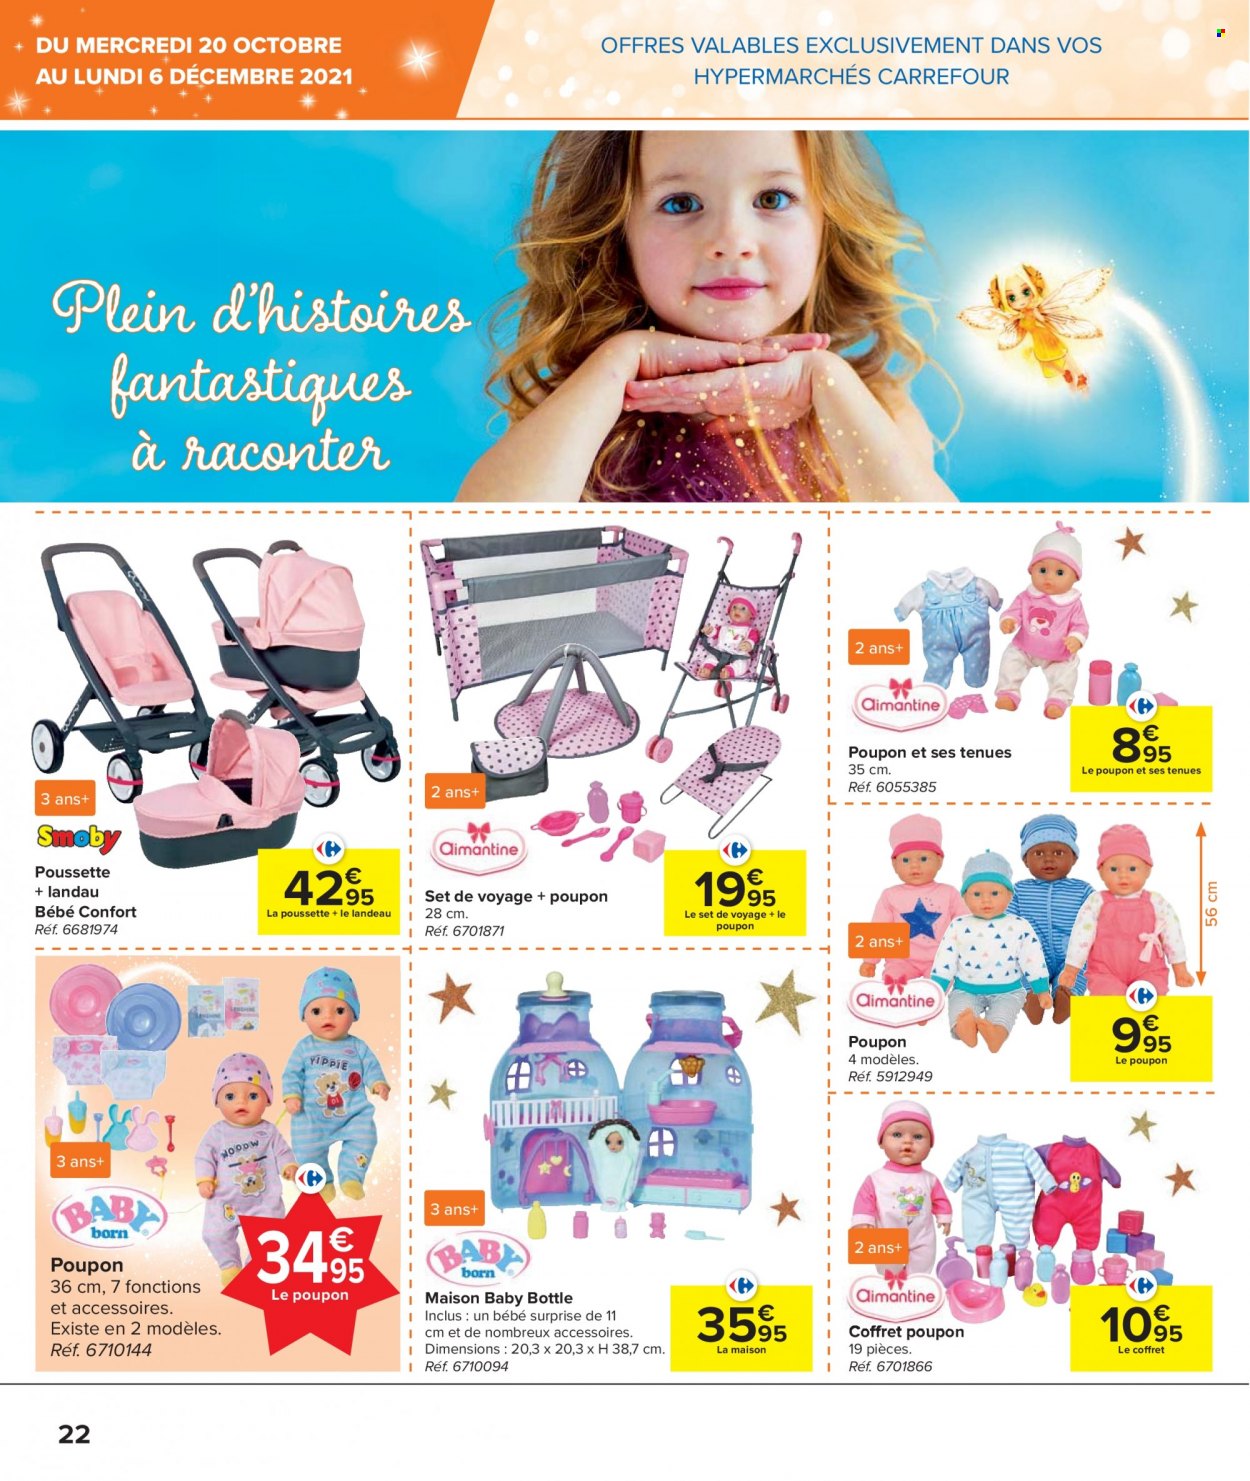 Catalogue Carrefour hypermarkt - 20.10.2021 - 6.12.2021. Page 22.